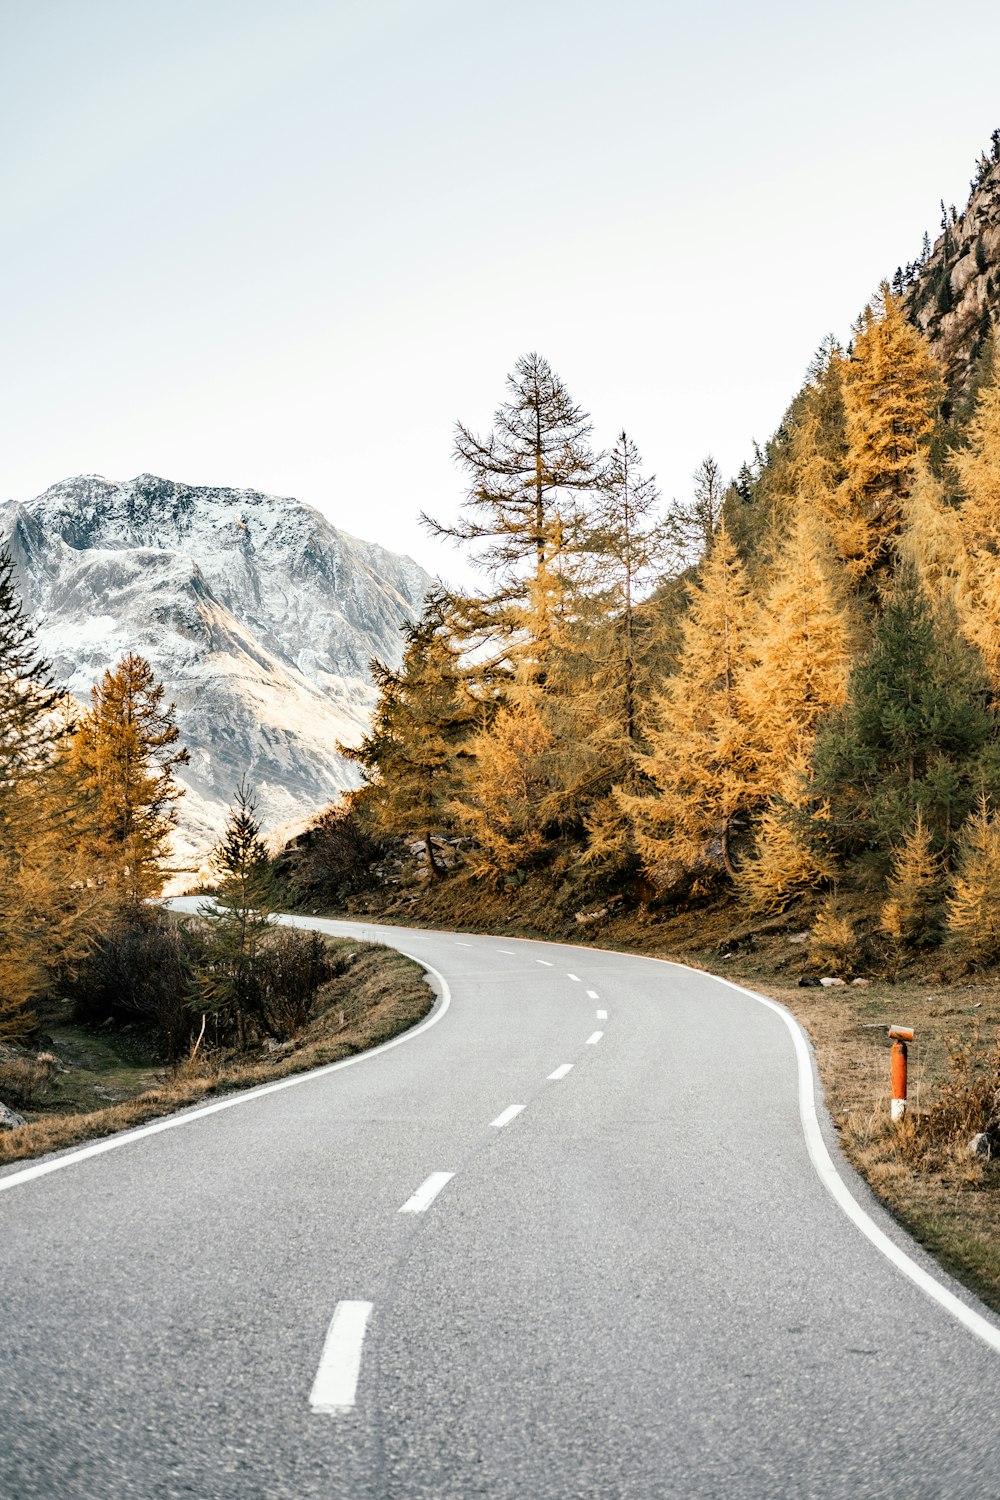 100+ Roads Pictures [HD] | Download Free Images on Unsplash